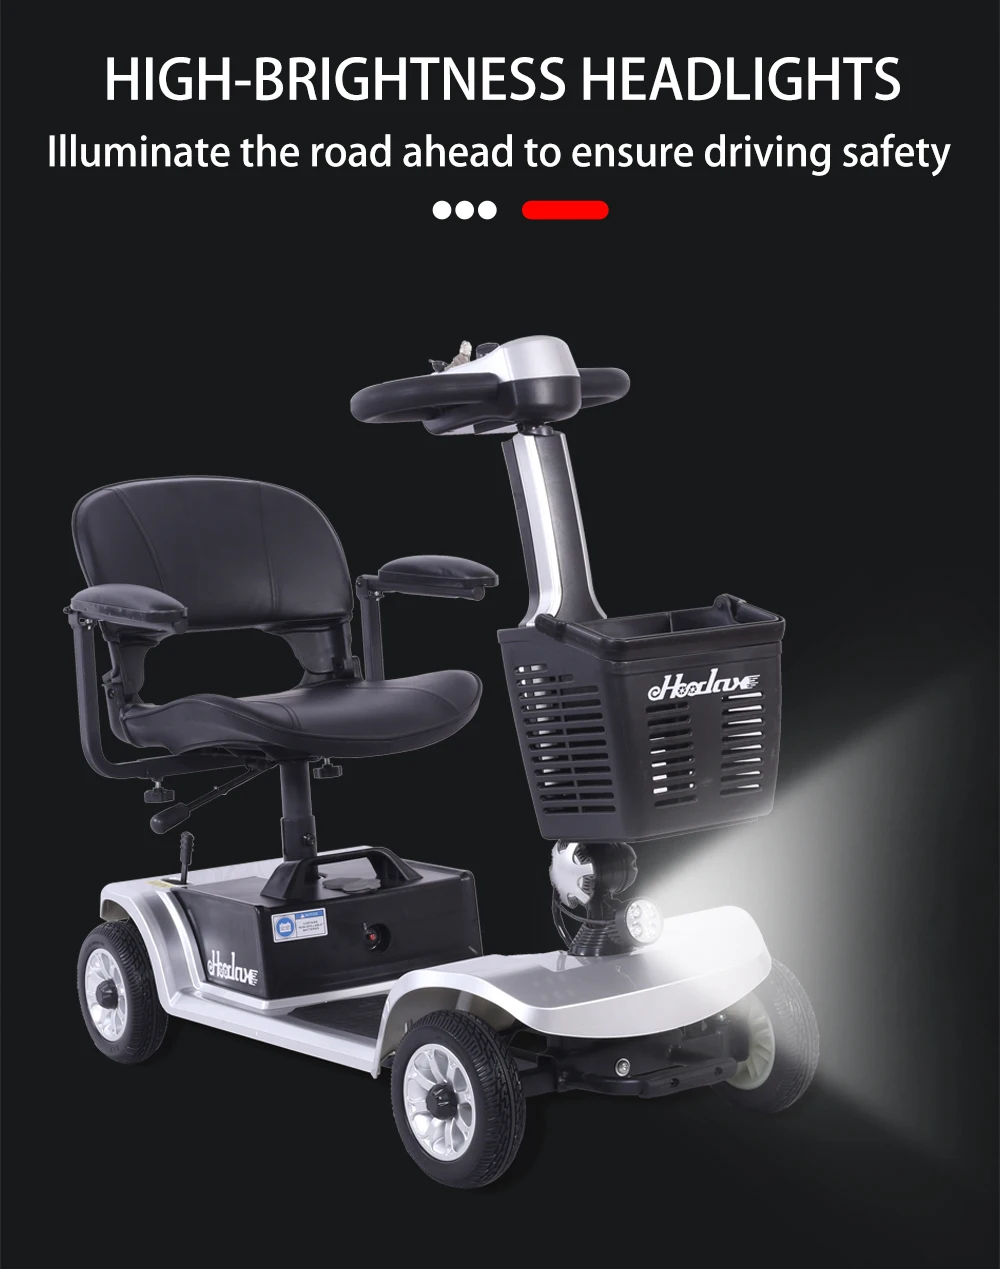 High brightness headlights illuminate the road to ensure safety on a foldable 4-Wheel Electric Scooter.